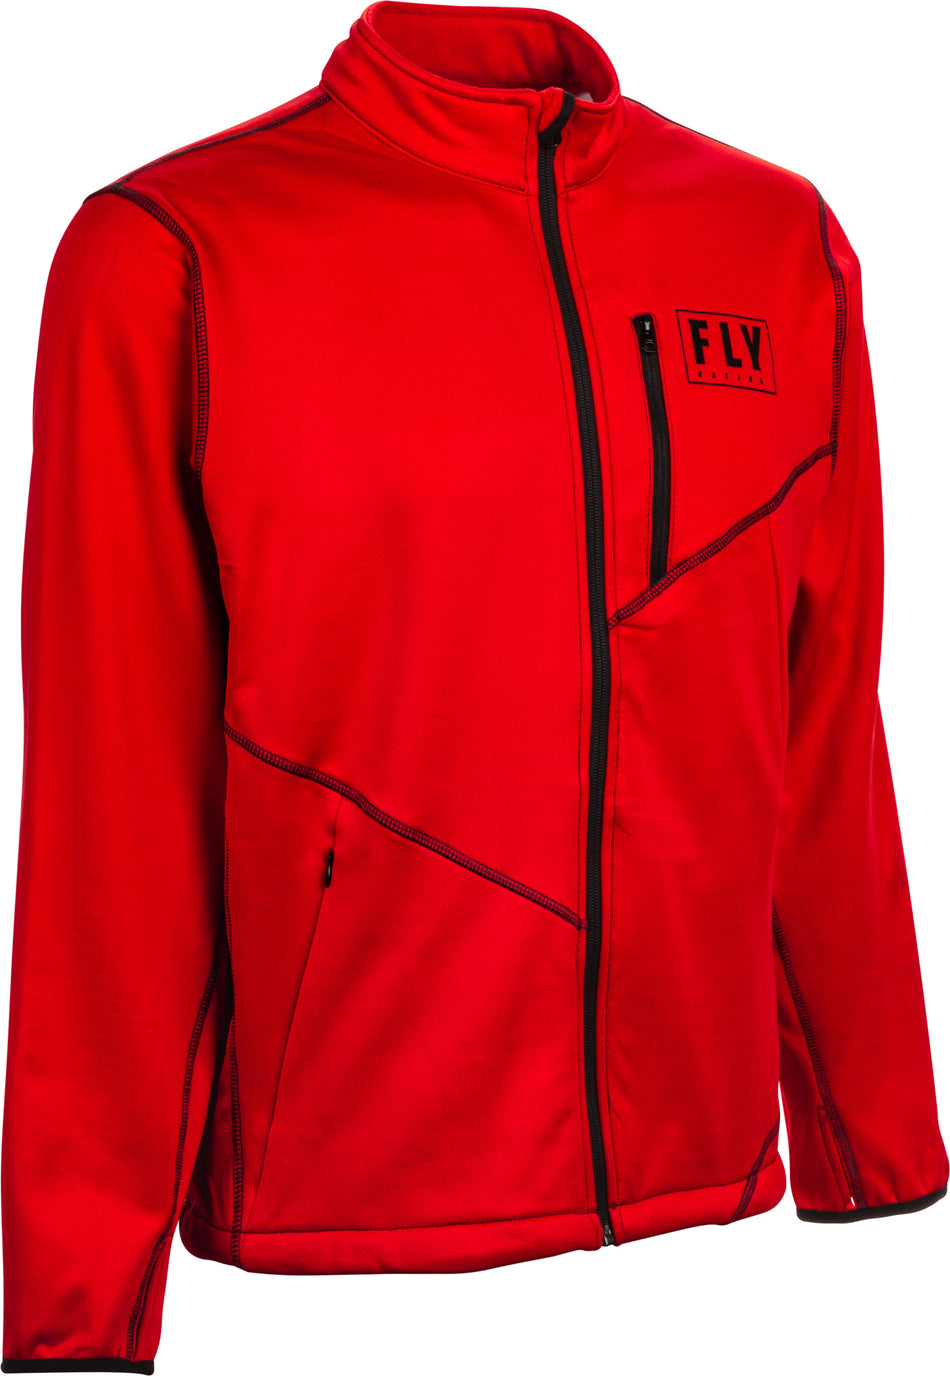 FLY RACING Mid-Layer Jacket Red Md 354-6321M